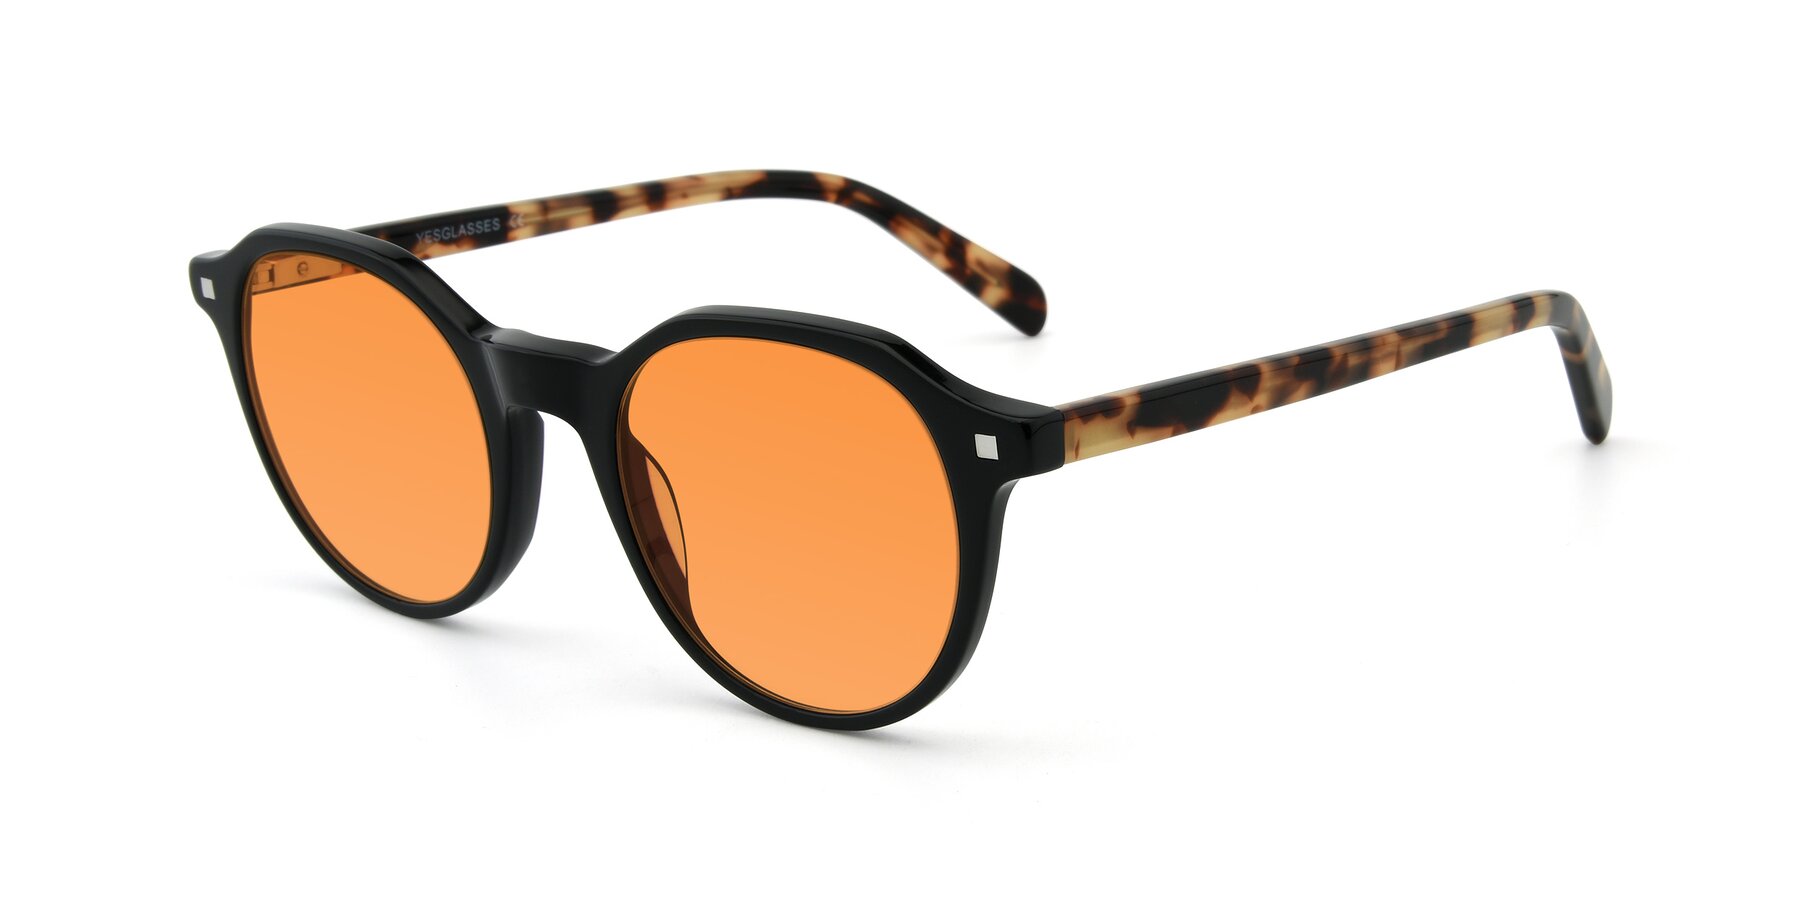 Angle of 17425 in Black with Orange Tinted Lenses